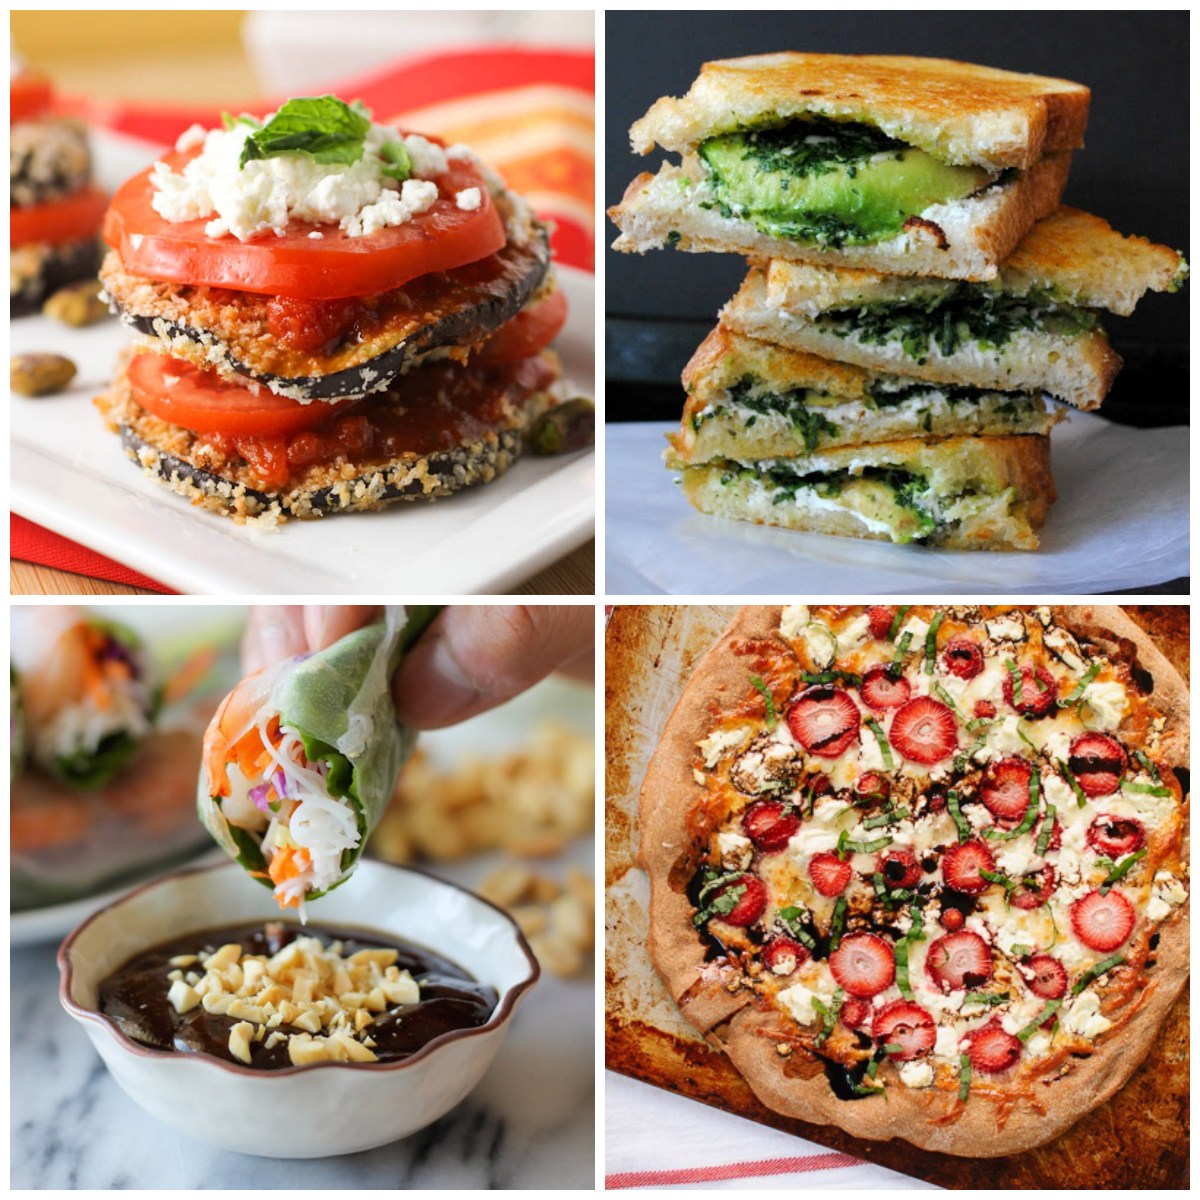 Strawberries on pizza, grown-up grilled cheese, and more | Cook Smarts